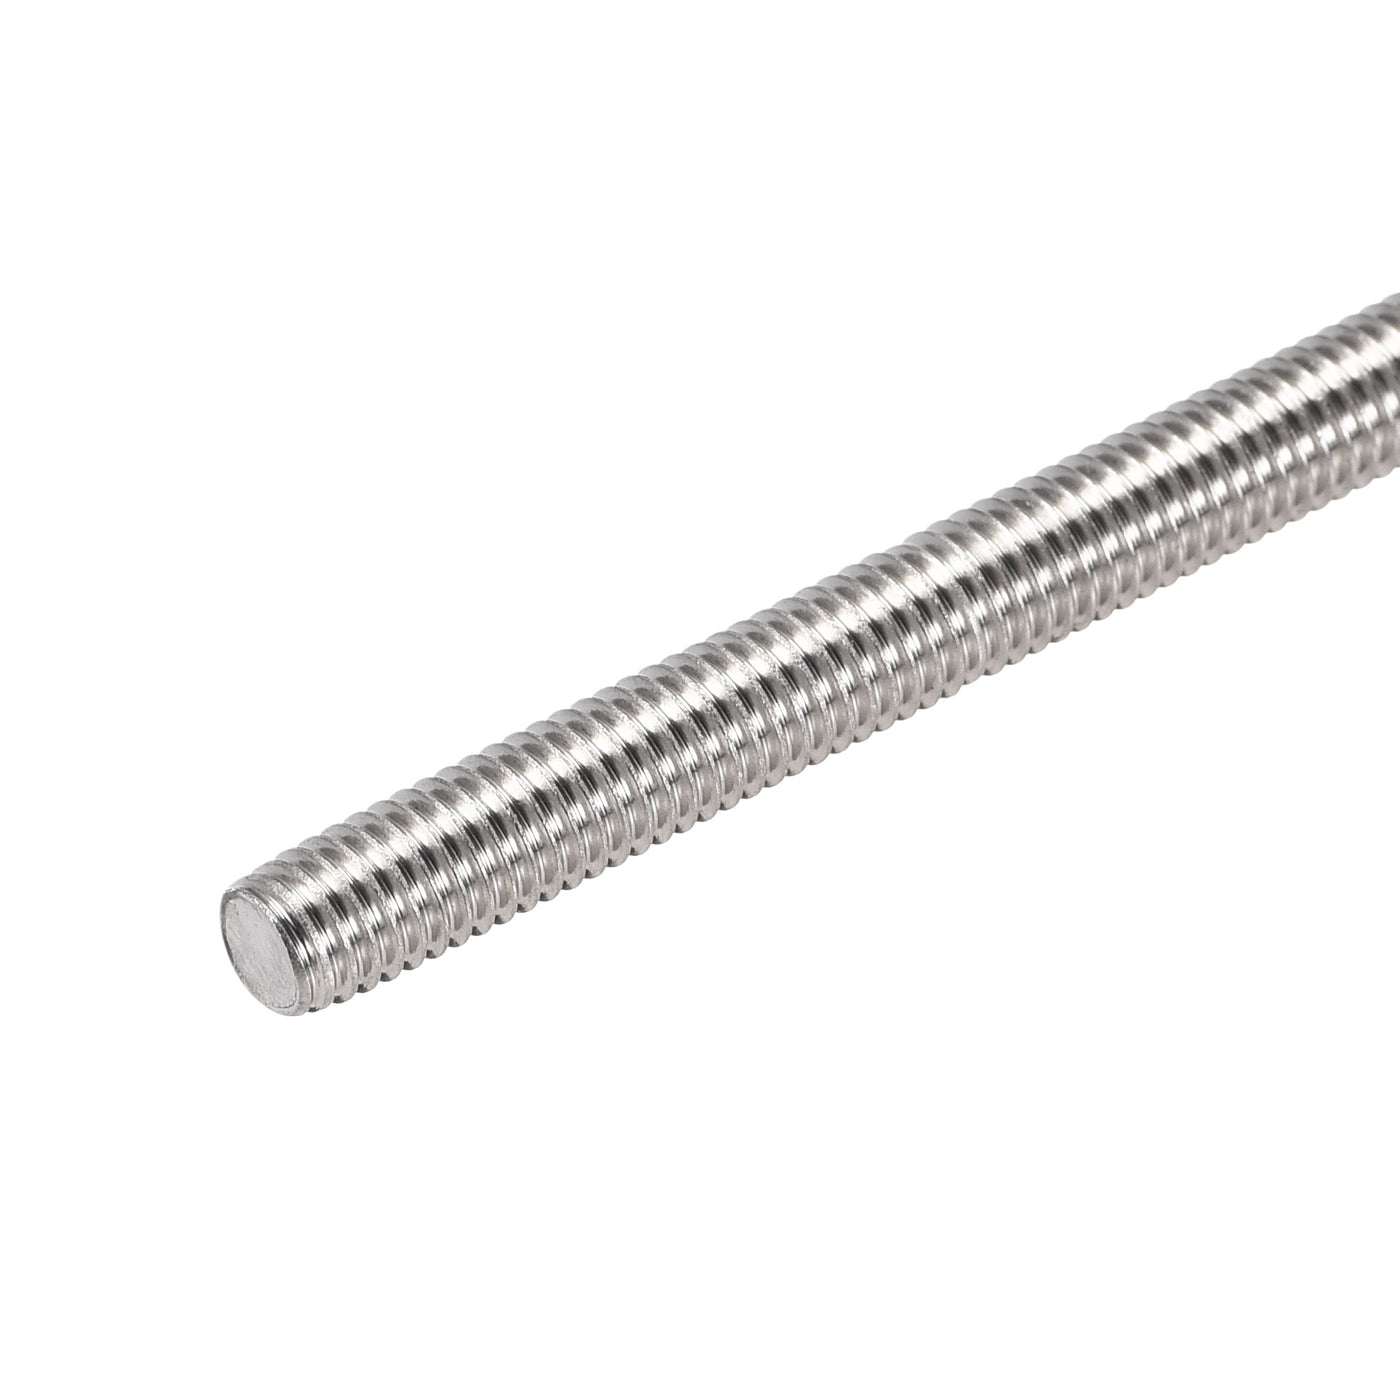 uxcell Uxcell 6pcs M5 x 110mm Fully Threaded Rod 304 Stainless Steel Right Hand 0.8mm Pitch